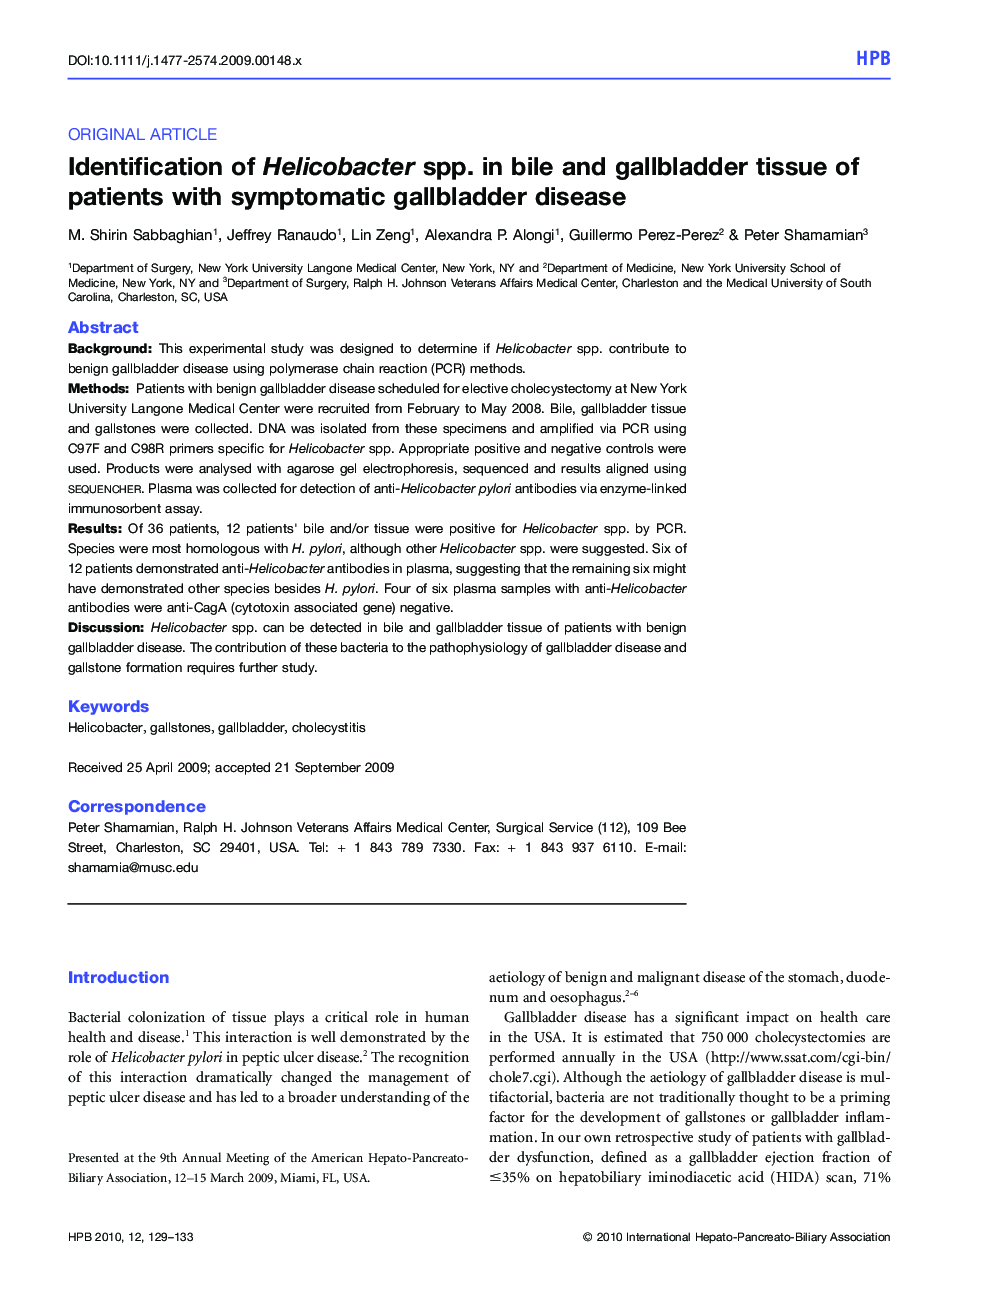 Identification of Helicobacter spp. in bile and gallbladder tissue of patients with symptomatic gallbladder disease